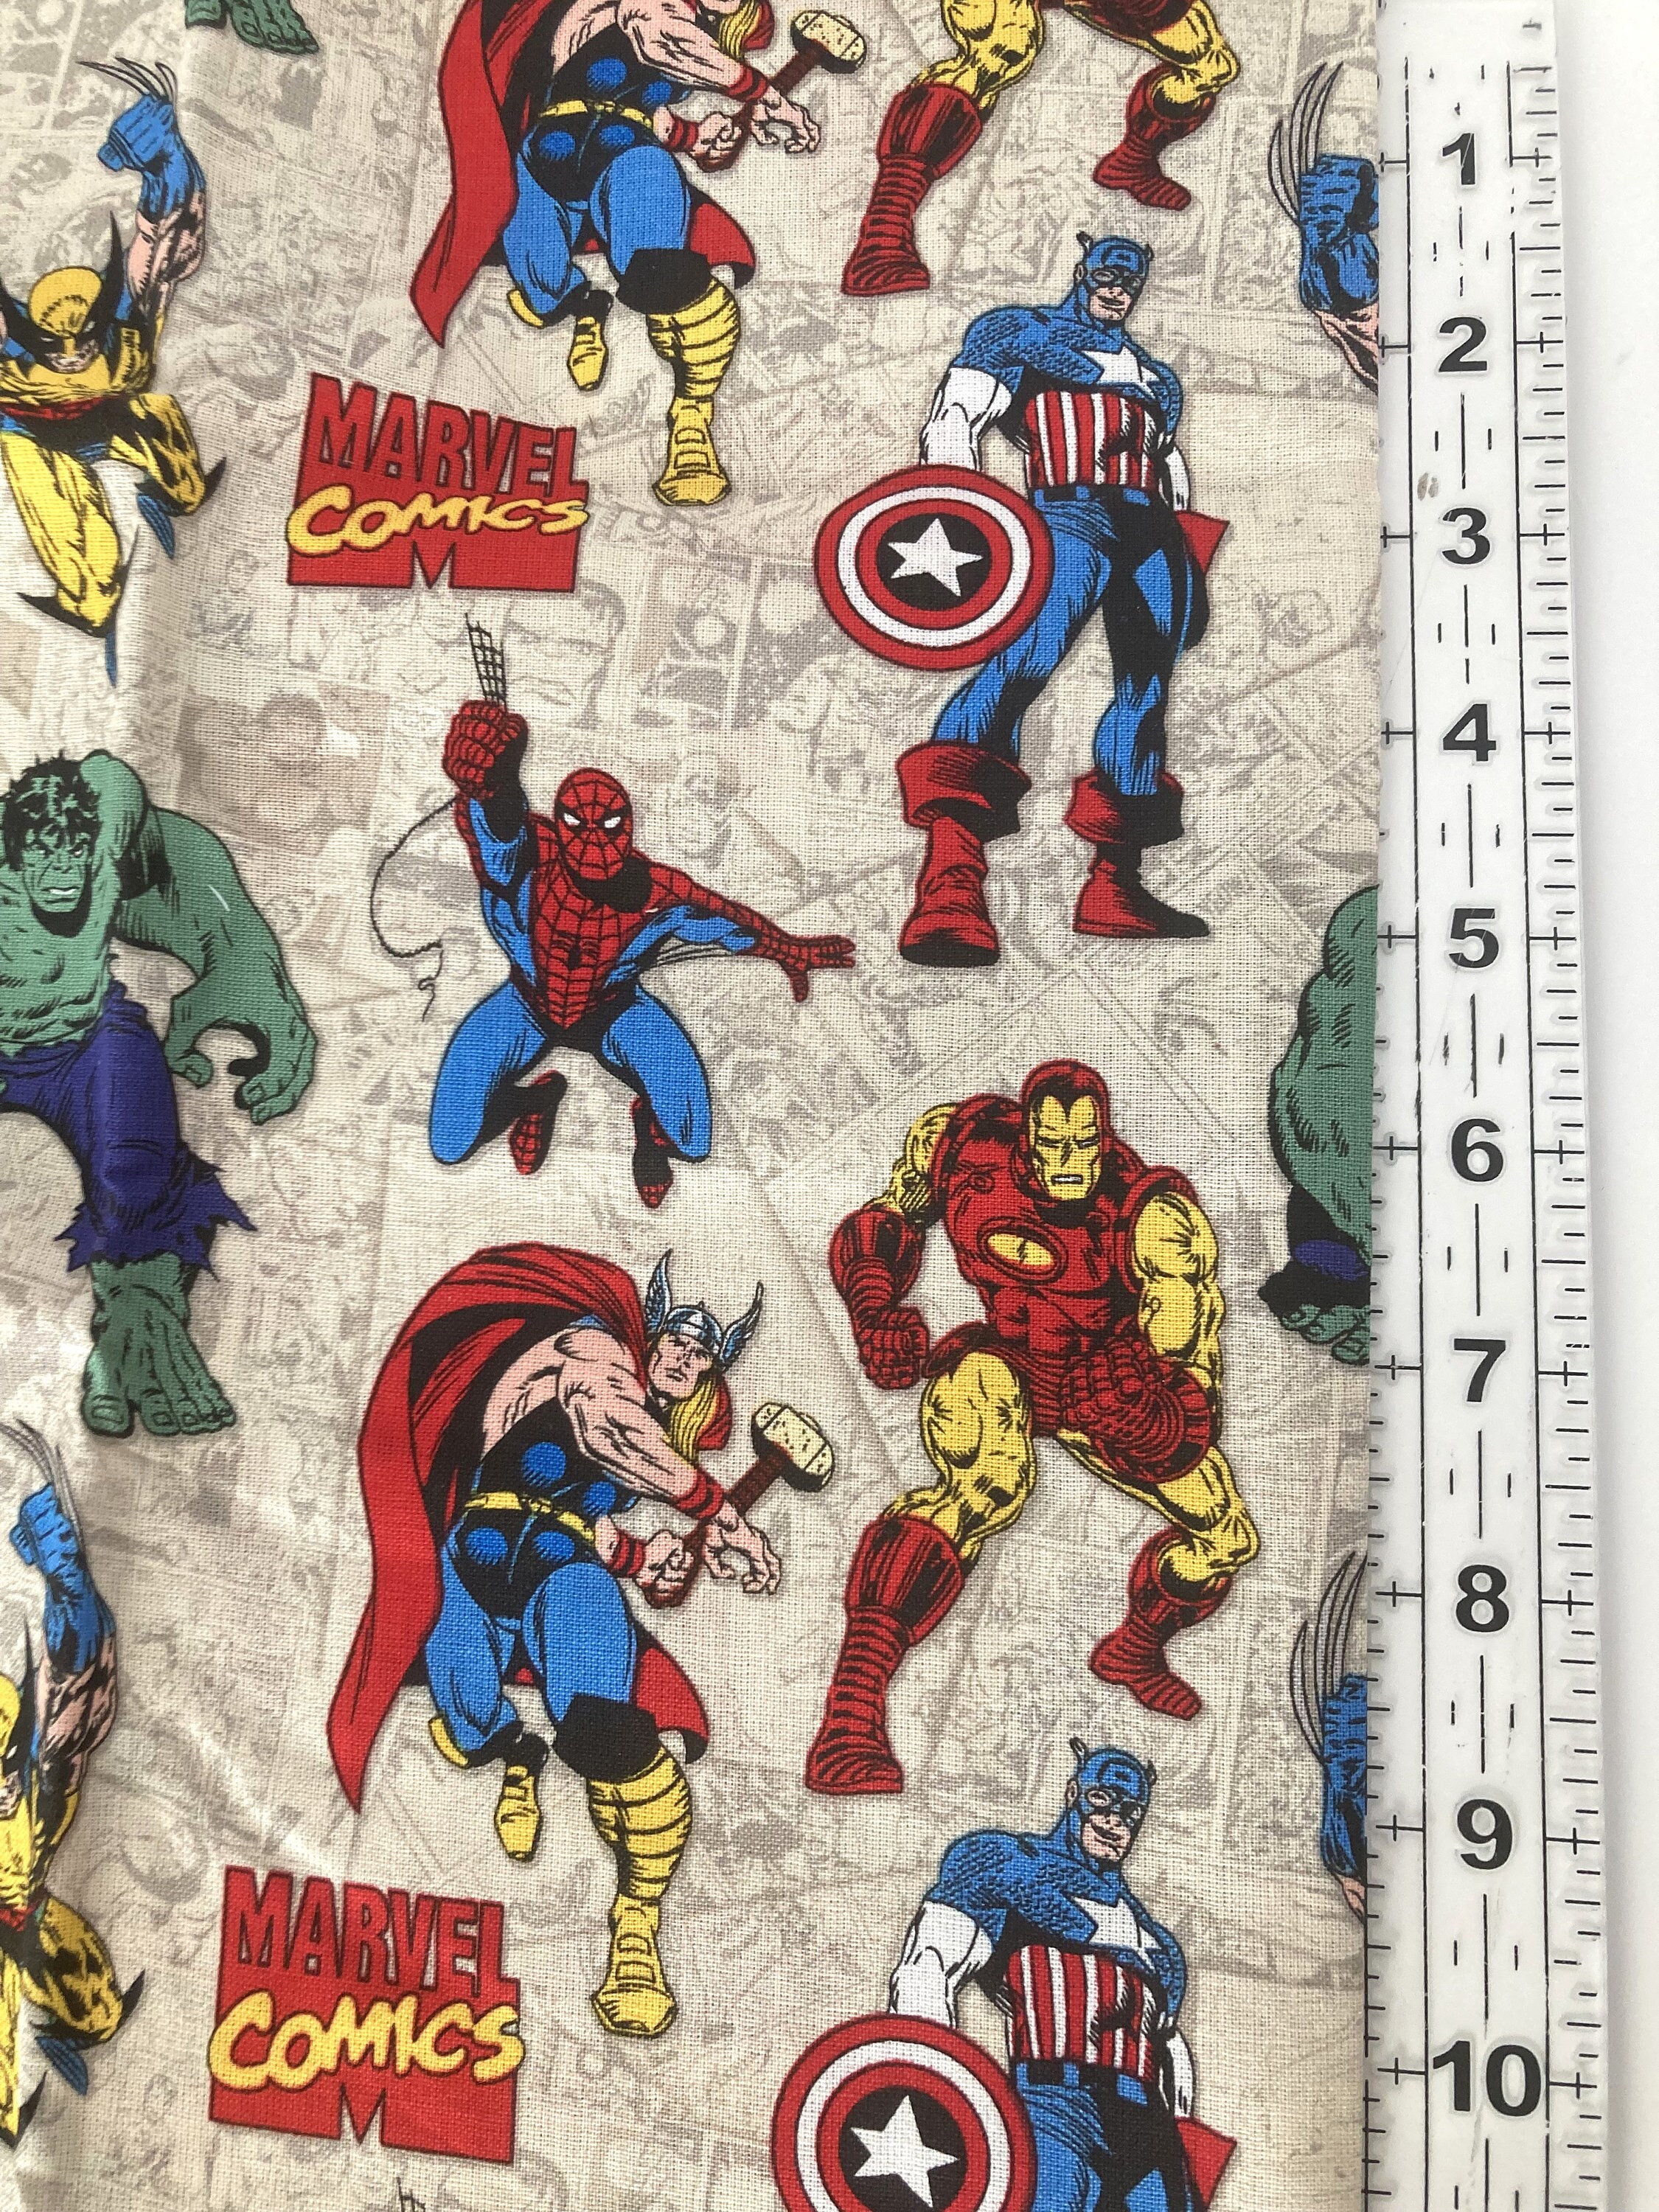 Make Your Own Comics Comic Book DIY Kit Elements Bubbles Everything You  Need. Fun Comic Book Designs Pngs With Transparent 